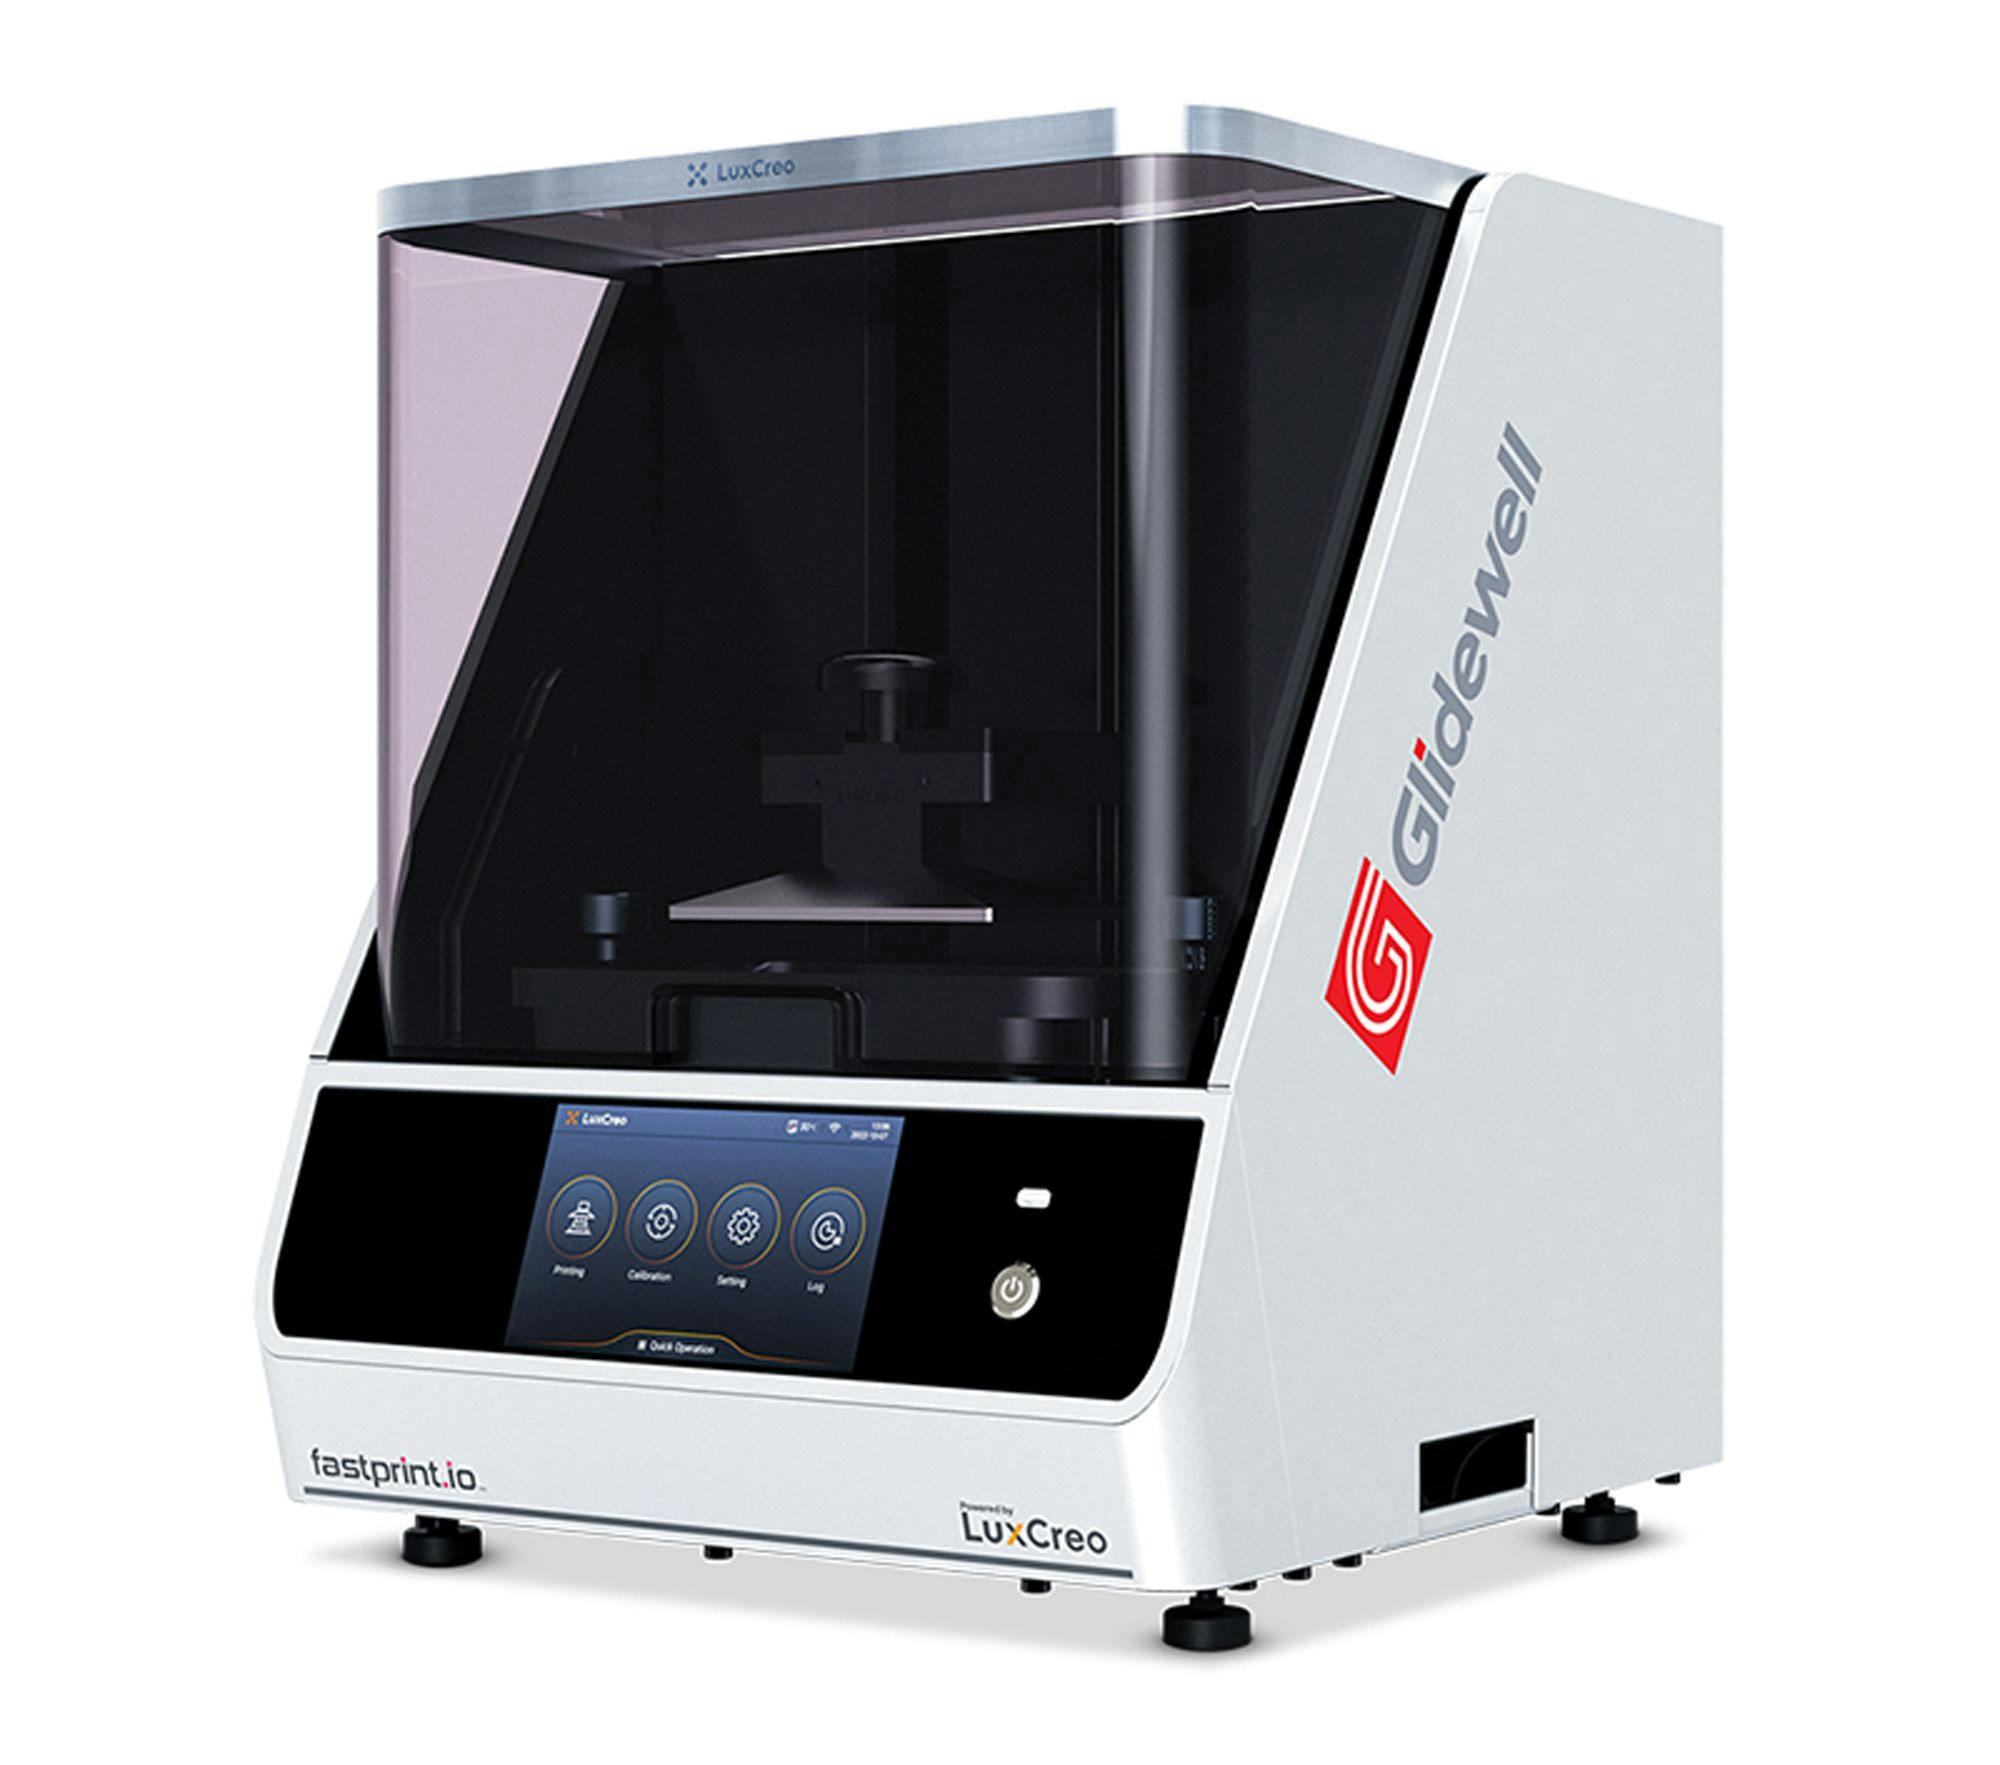 Glidewell Partners with LuxCreo to Launch fastprint.io 3D Printing Solution. Image: © Glidewell 